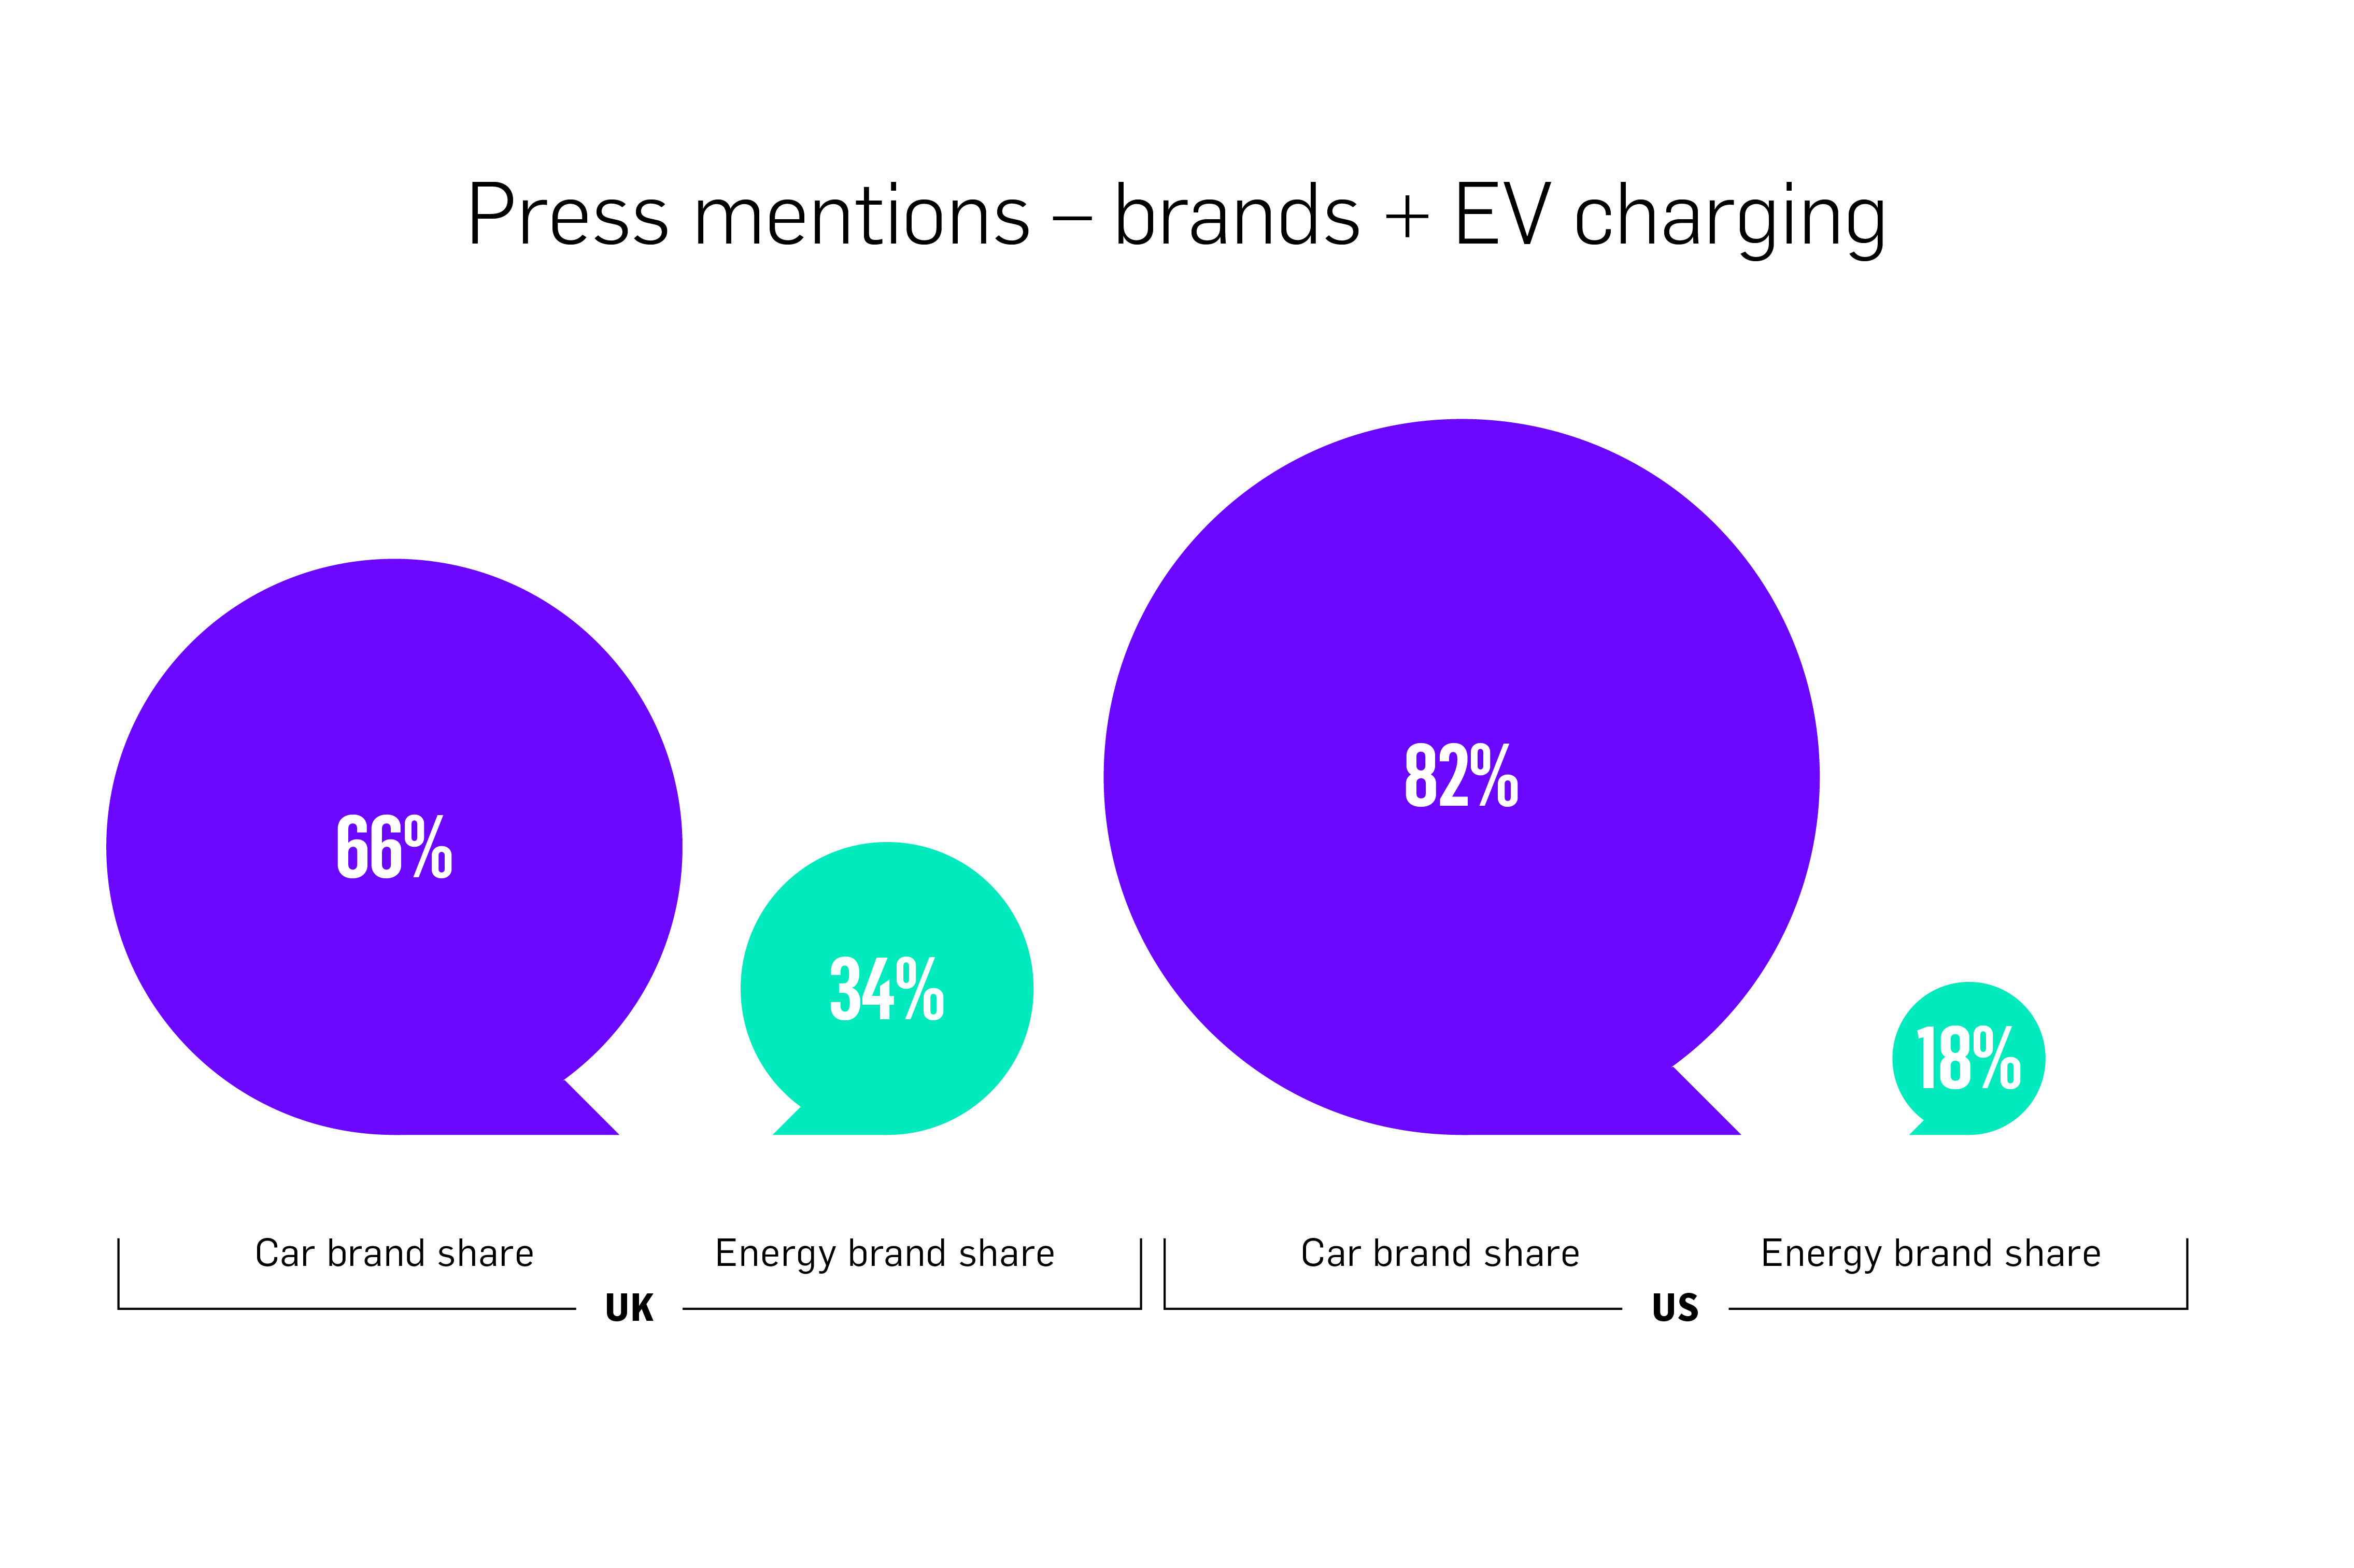 Share of voice data press